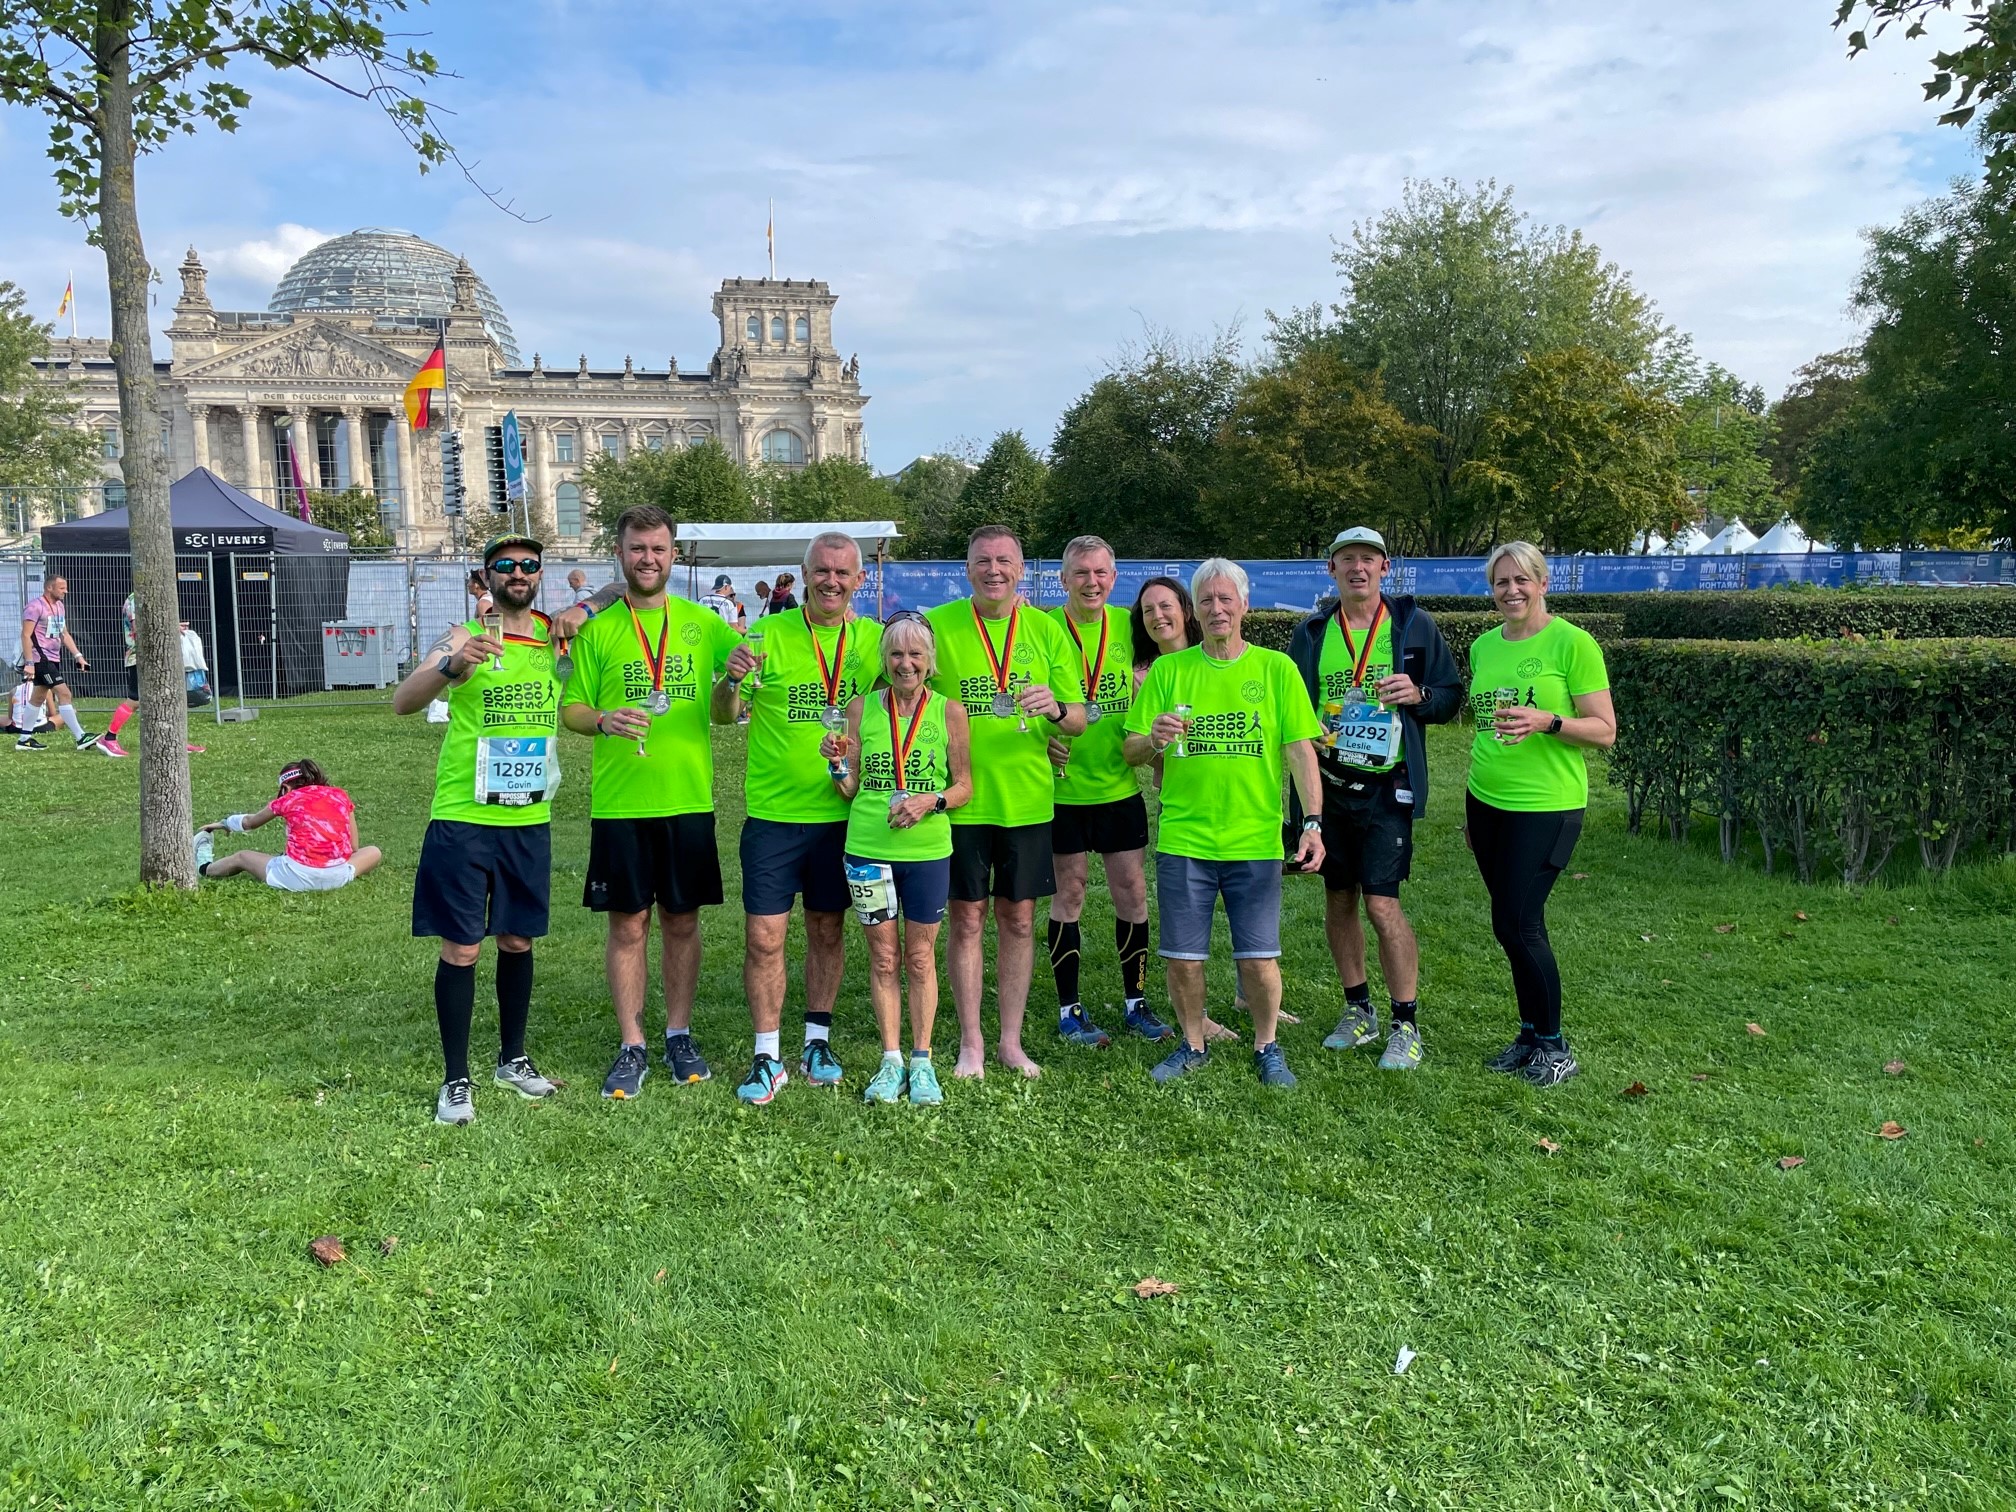 Gina Little celebrates her 600th marathon with friends from Plumstead Runners, in front of the Reichstag in Berlin